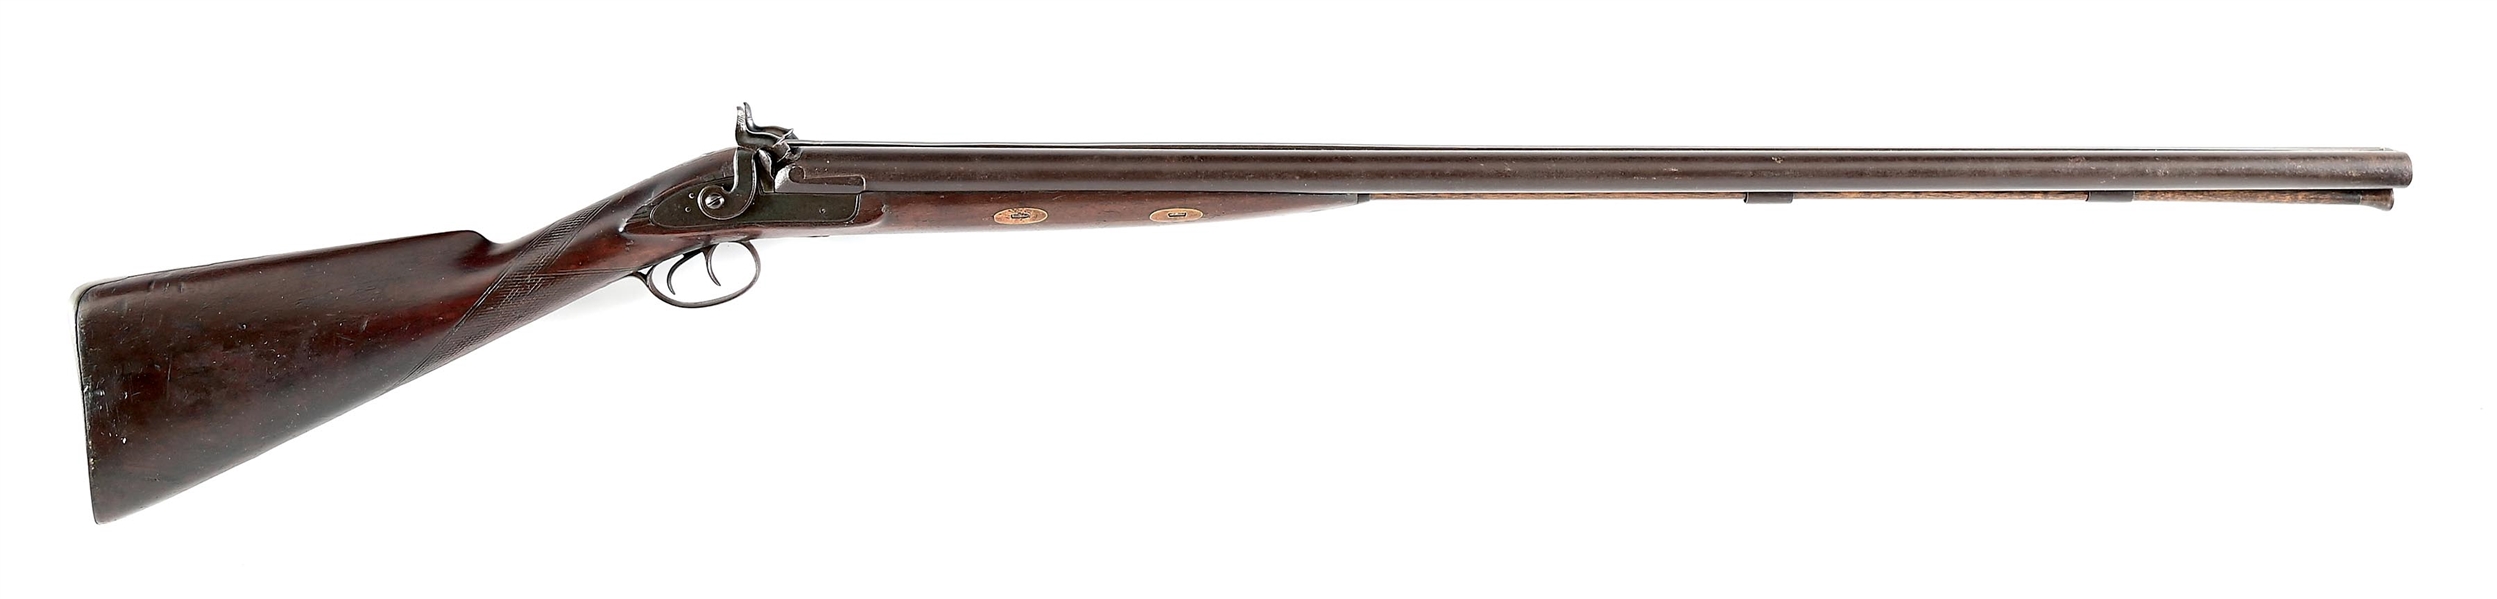 (A) W. FAVIER OF BALTIMORE, MARYLAND PERCUSSION 8 BORE SIDE BY SIDE SHOTGUN.